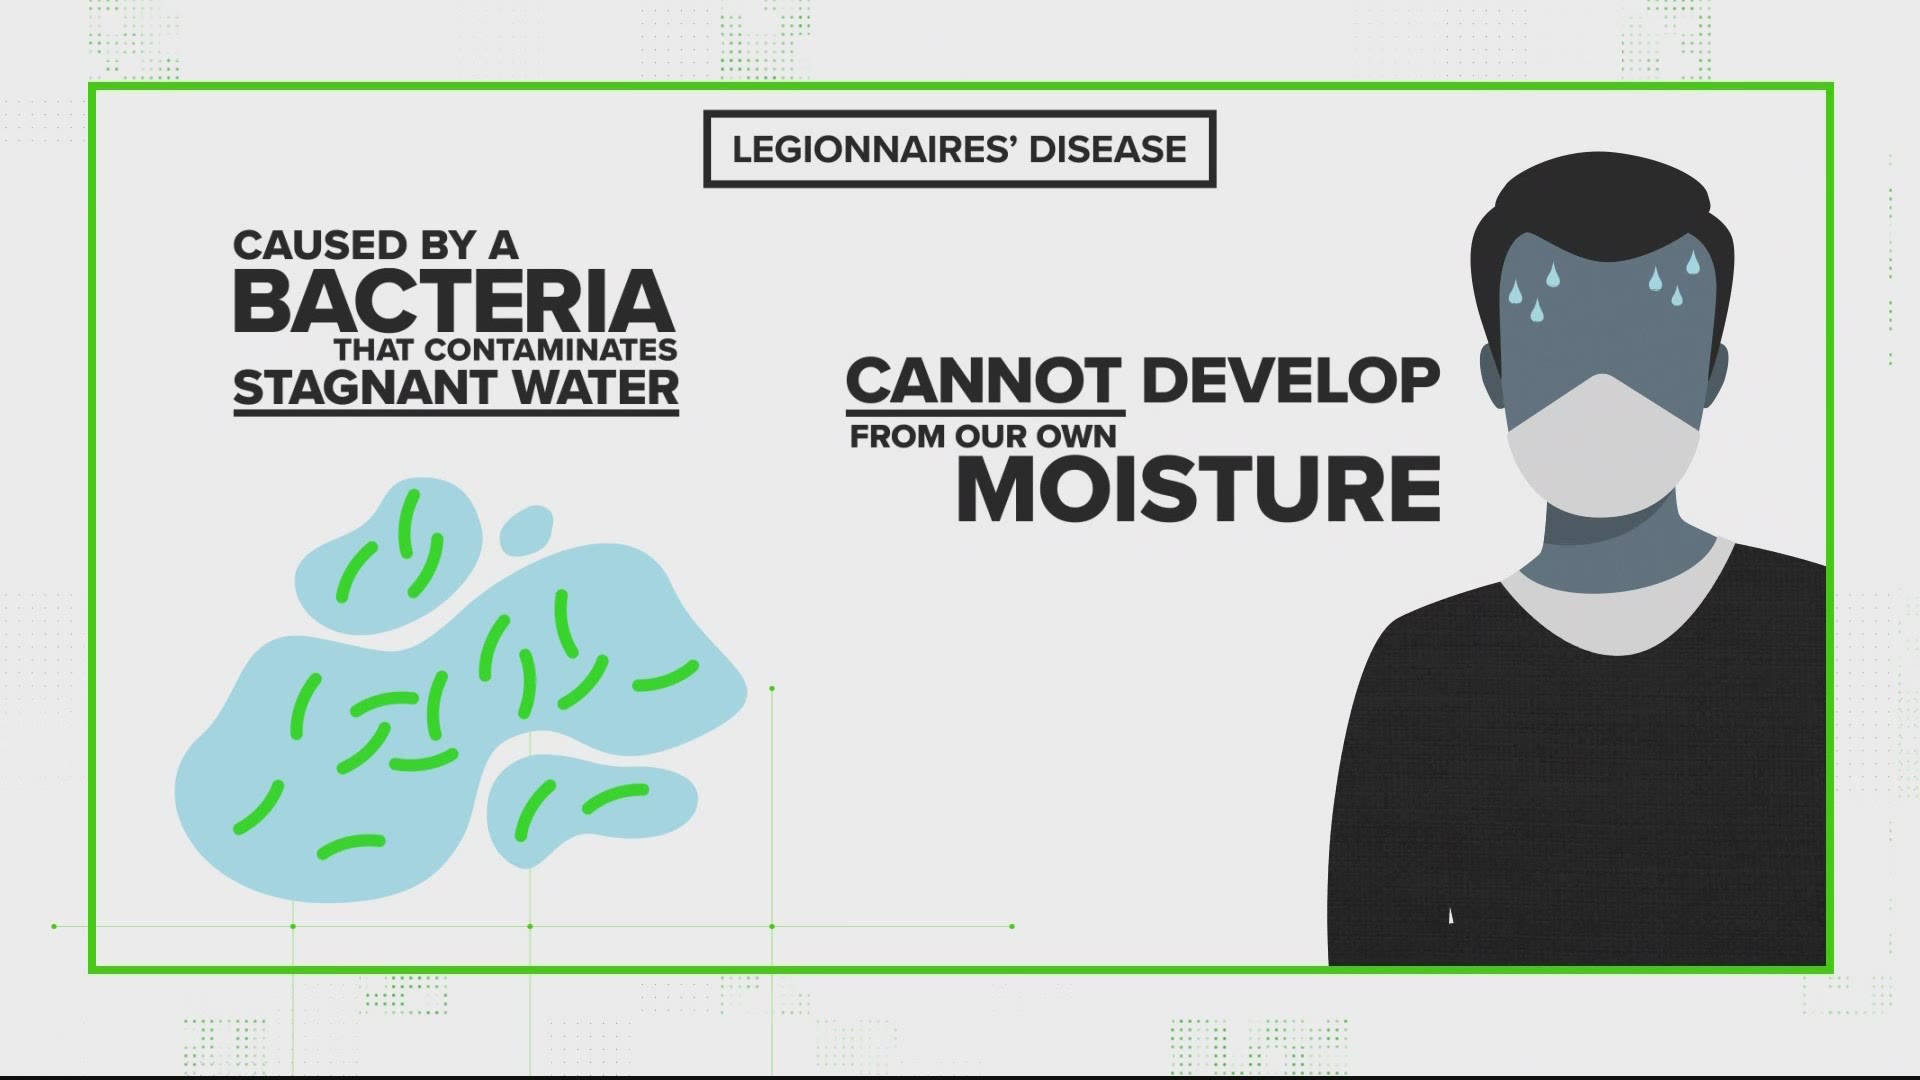 The viral claim online is false. Legionnaires' disease is caused by stagnant water.